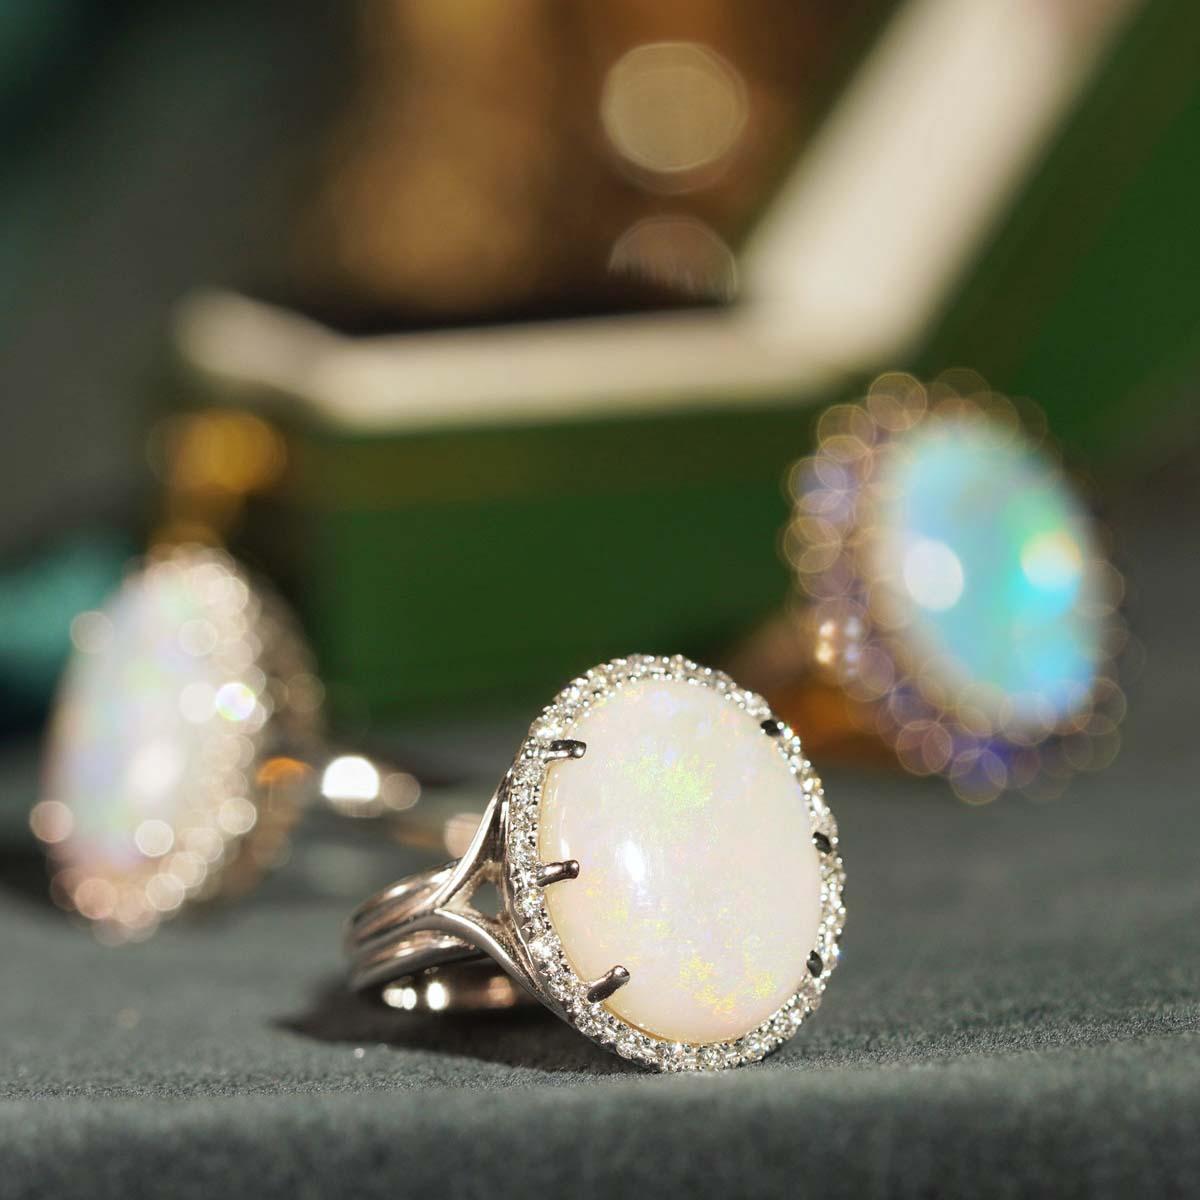 This beautiful ring is a classic vintage inspired style, the halo ring features play-of-color oval 4.22 carat opal for its center, surrounded by twenty-six white diamonds. This would make a wonderful statement ring, or just because it is beautiful.